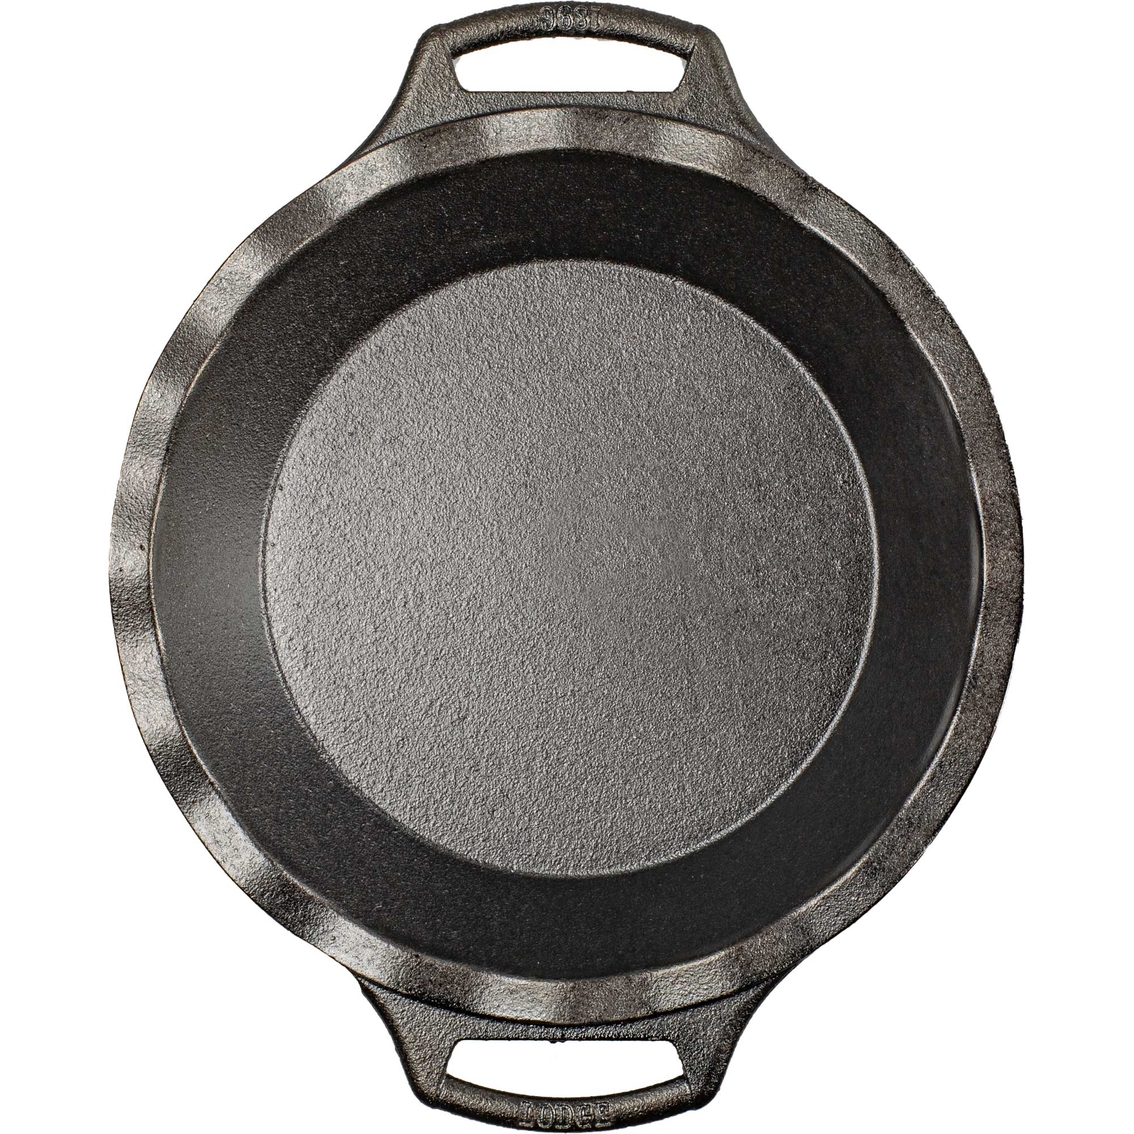 Lodge Cast Iron 9.5 in. Pie Pan - Image 3 of 7